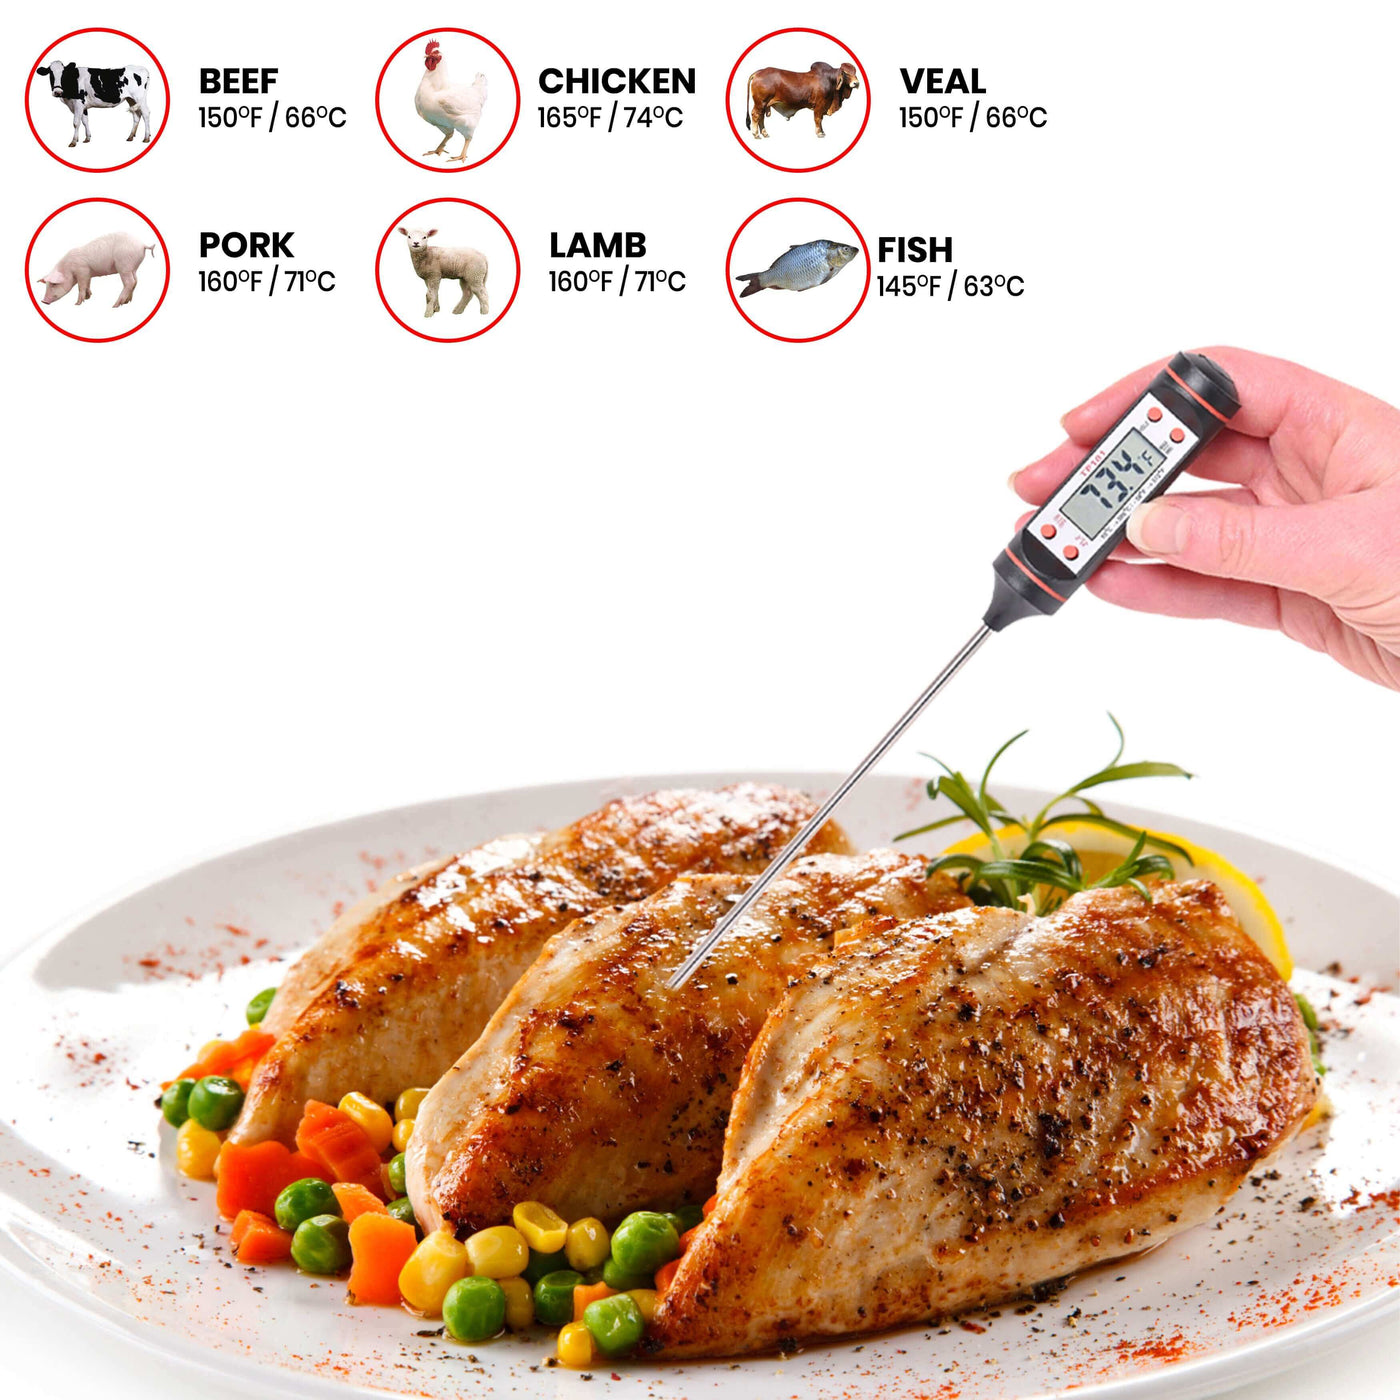 Meat Thermometer-Digital Food Thermometer for Cooking, Grilling